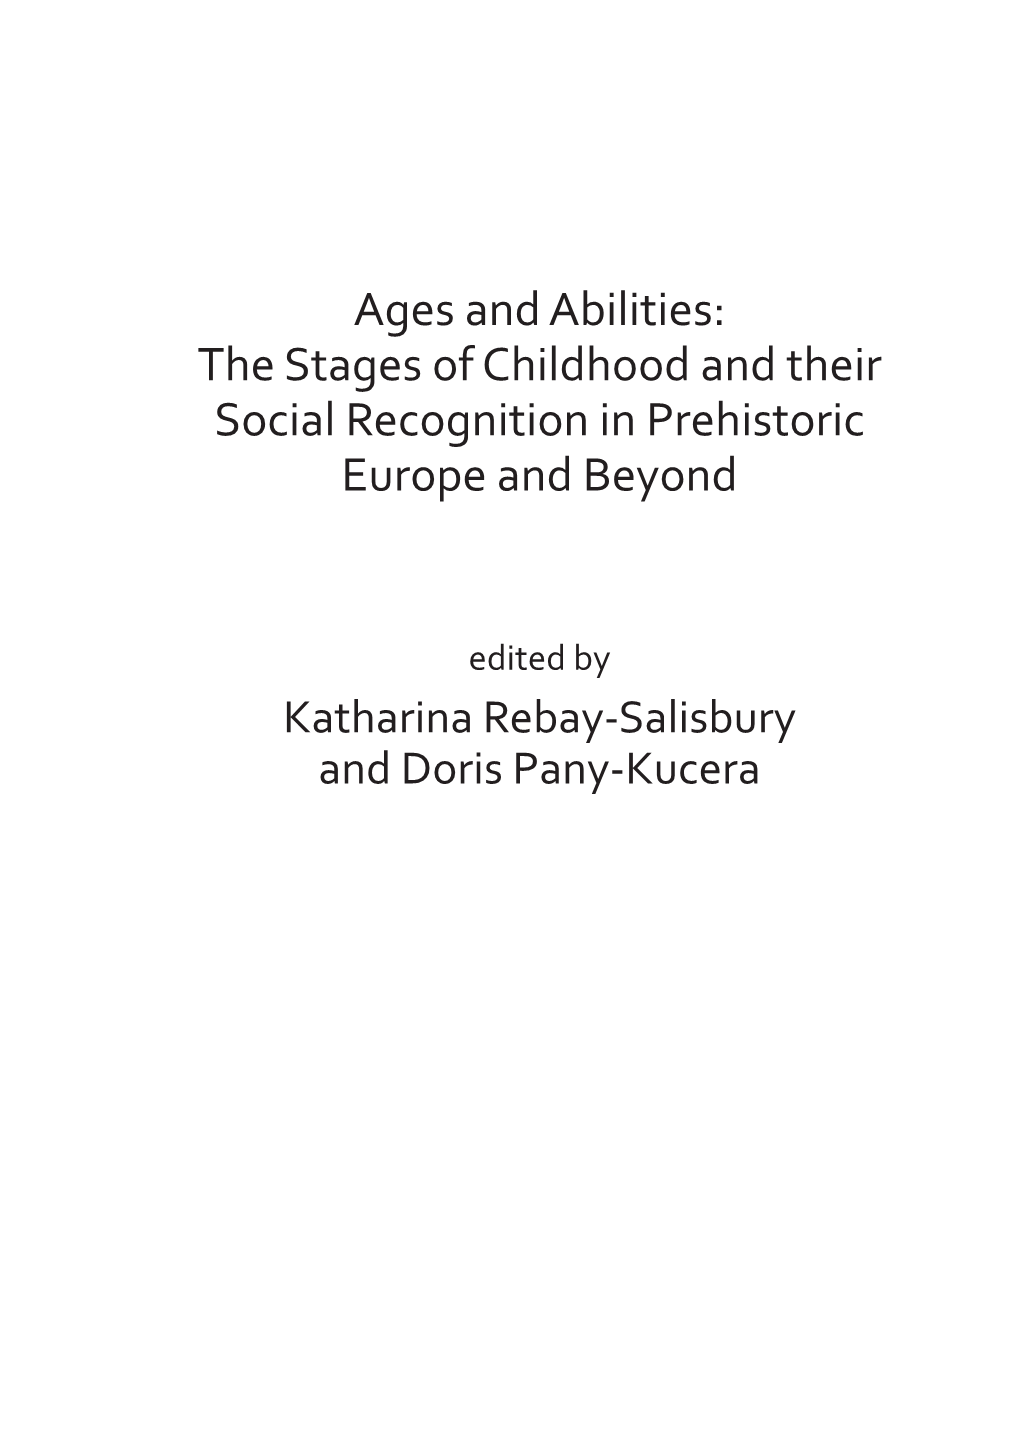 Ages and Abilities: the Stages of Childhood and Their Social Recognition in Prehistoric Europe and Beyond